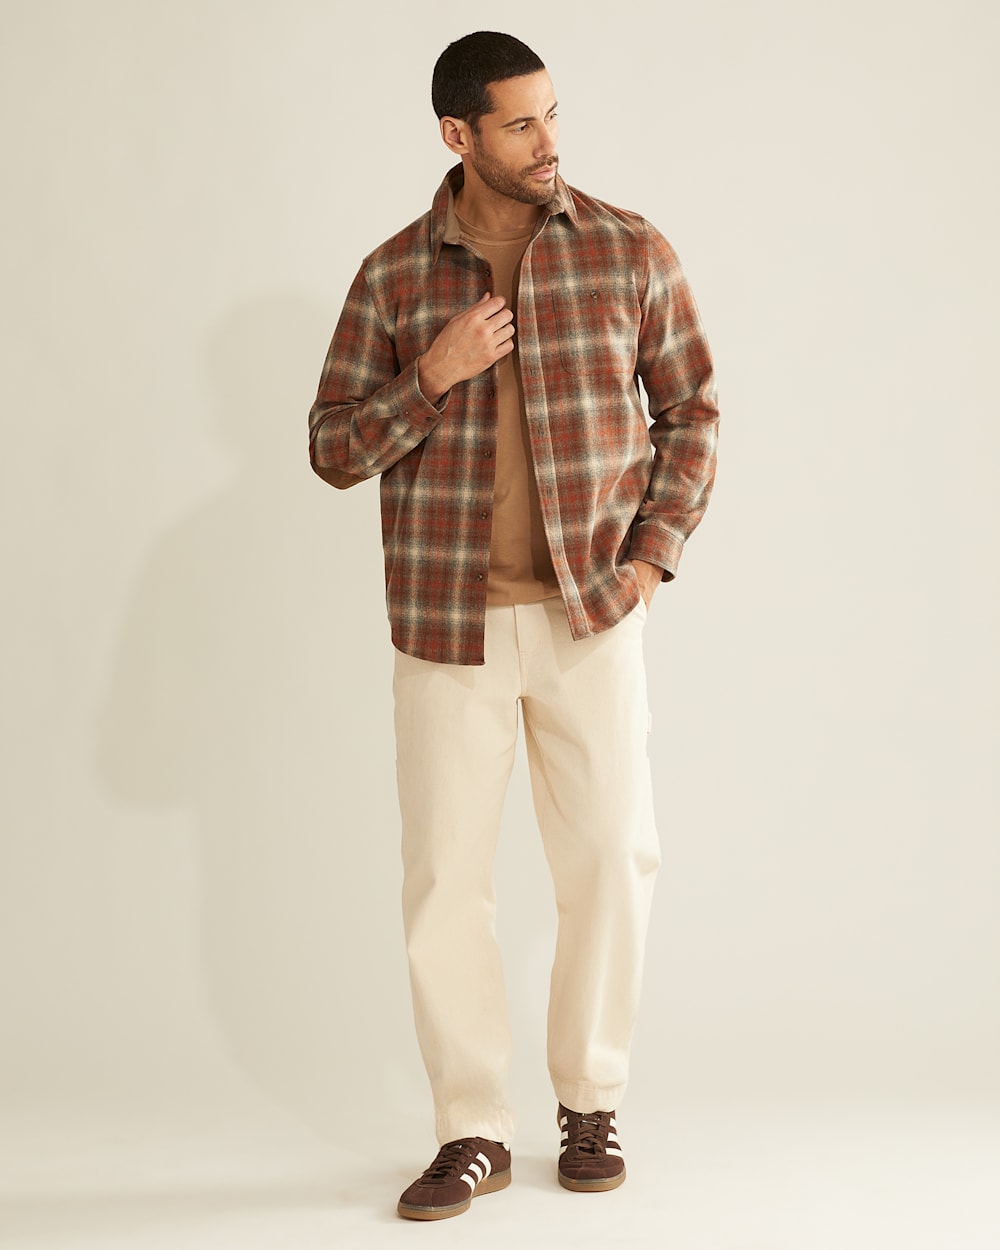 ALTERNATE VIEW OF MEN'S PLAID ELBOW-PATCH TRAIL SHIRT IN GREY/COPPER OMBRE image number 5